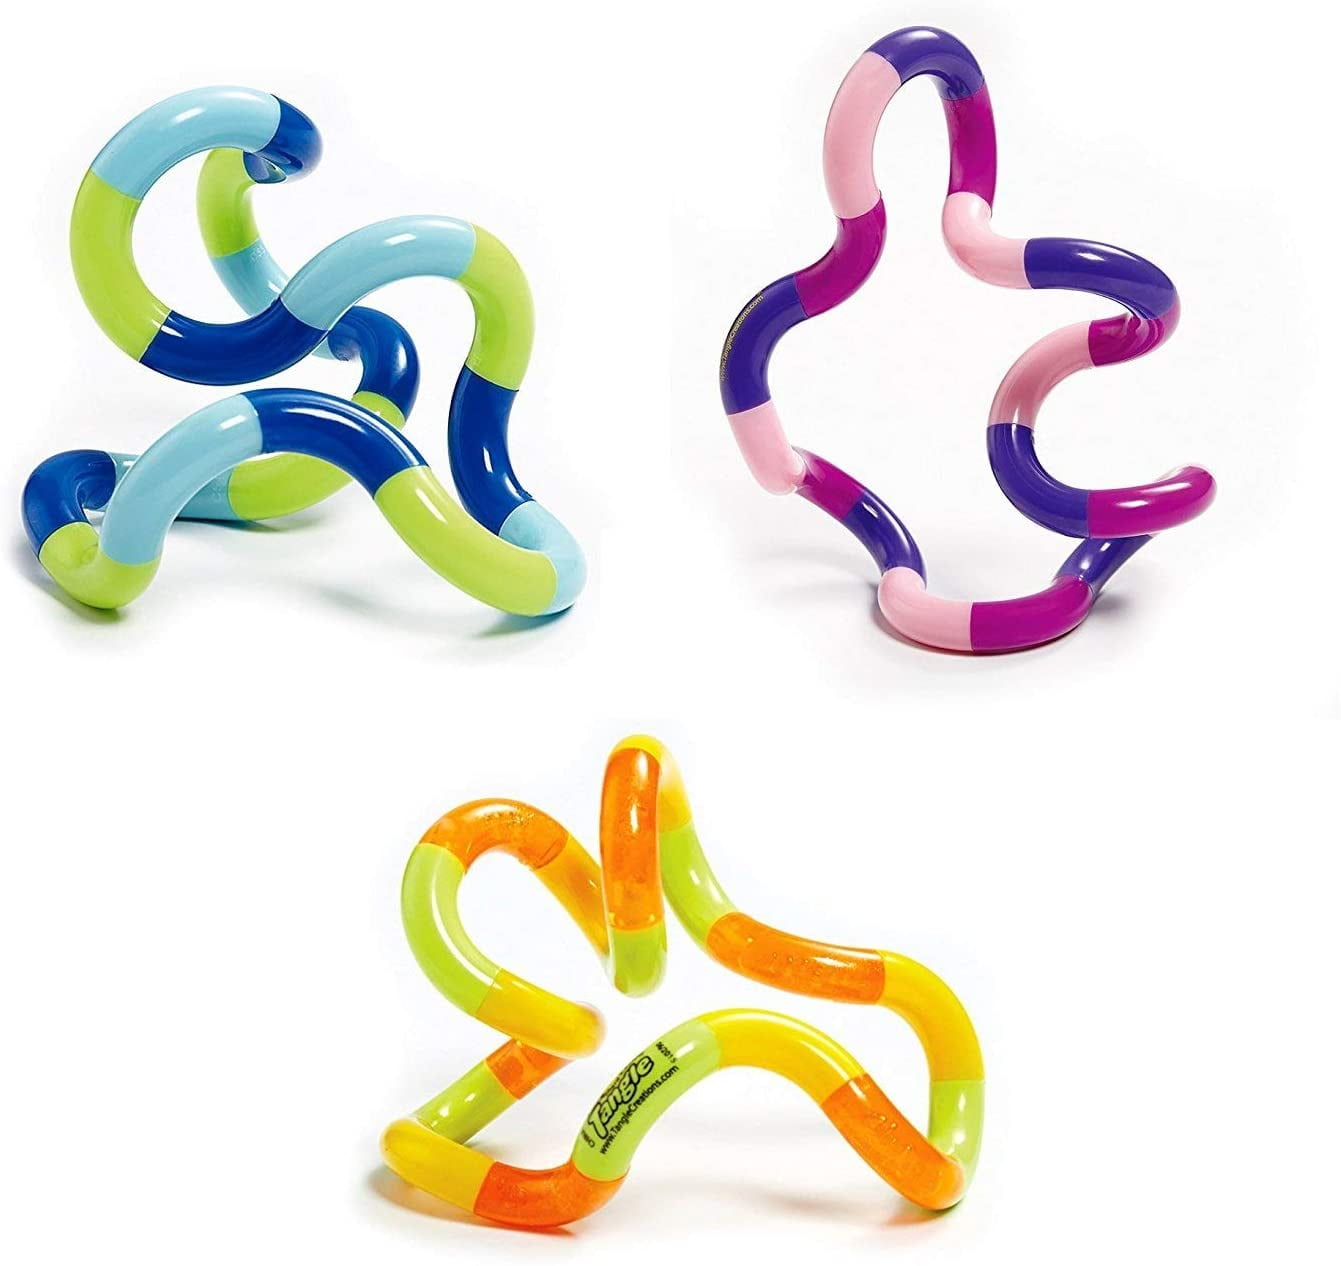 Tangles Fidget Relax Therapy Fiddle Stress ADHD Autism Sensory Toy Random color~ 